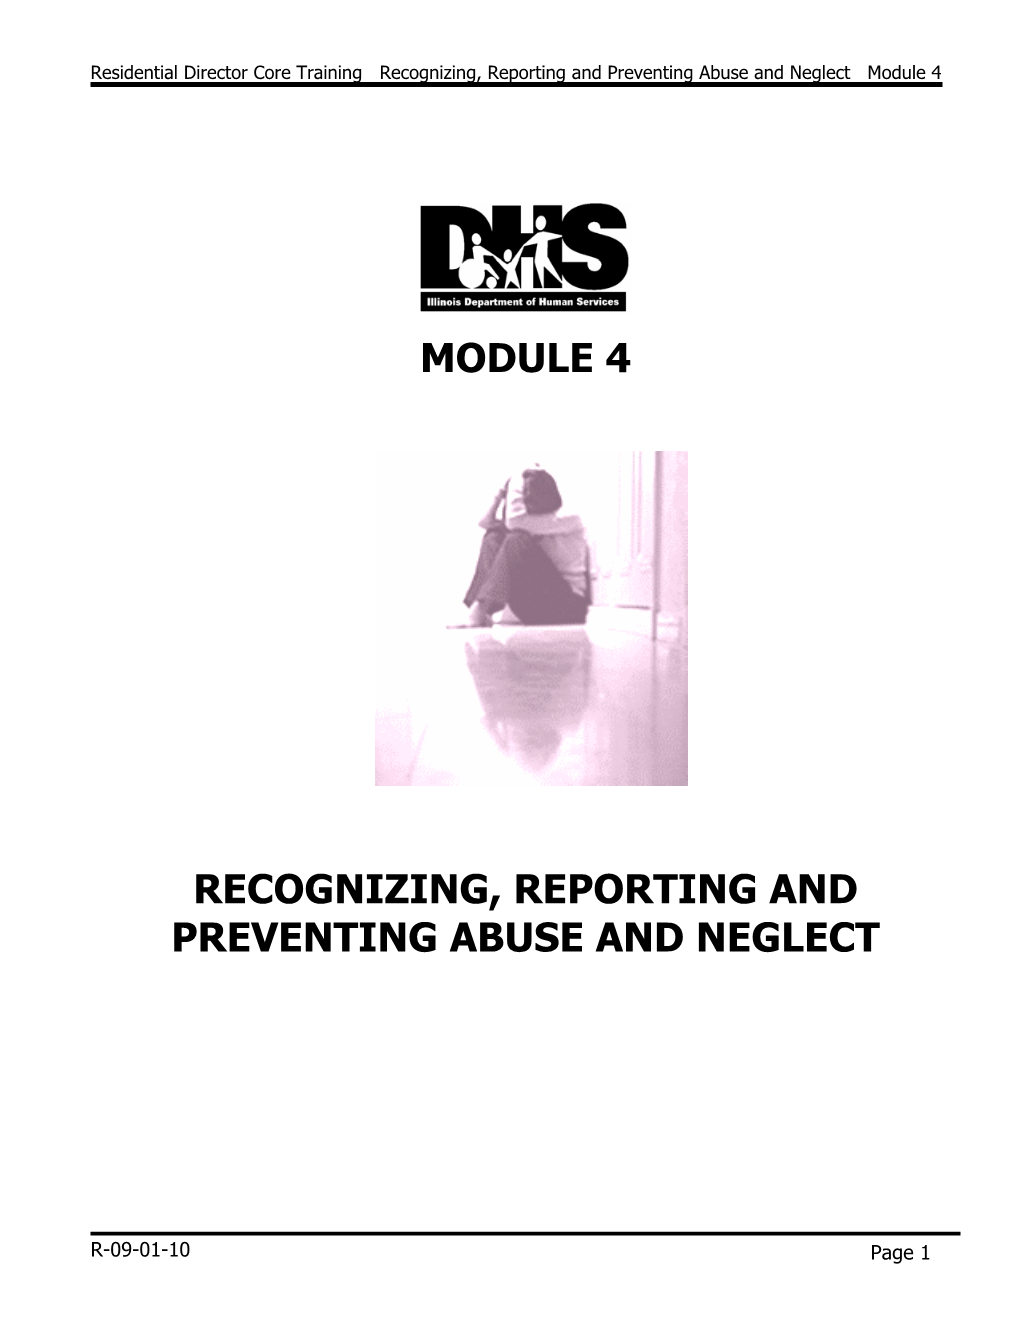 Module 4 Recognizing, Reporting and Preventing